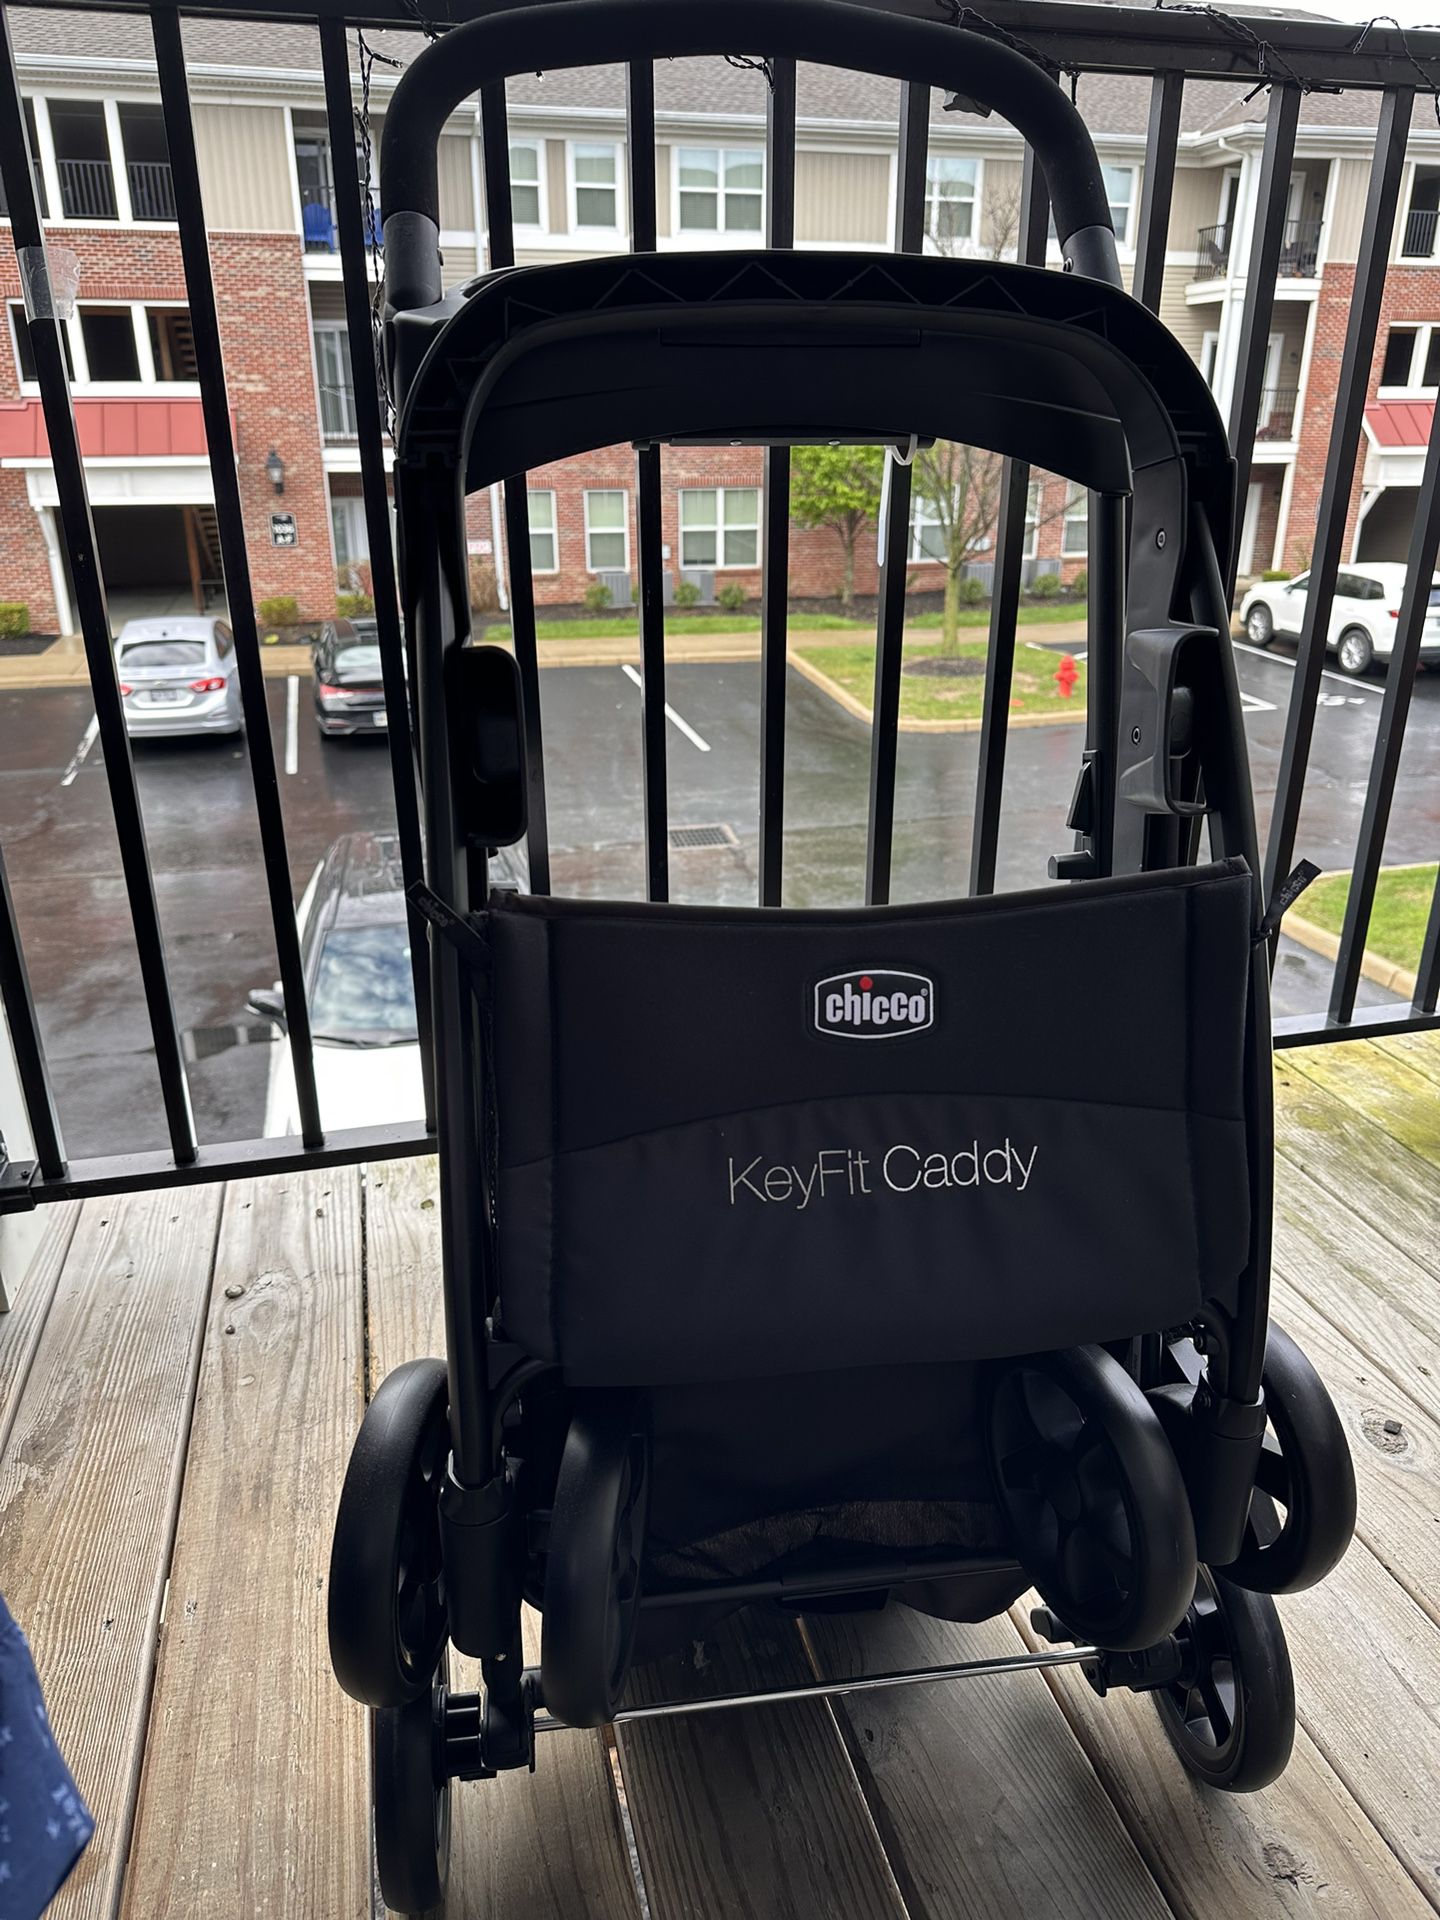 Chicco KeyFit Caddy For Chicco Car Seats